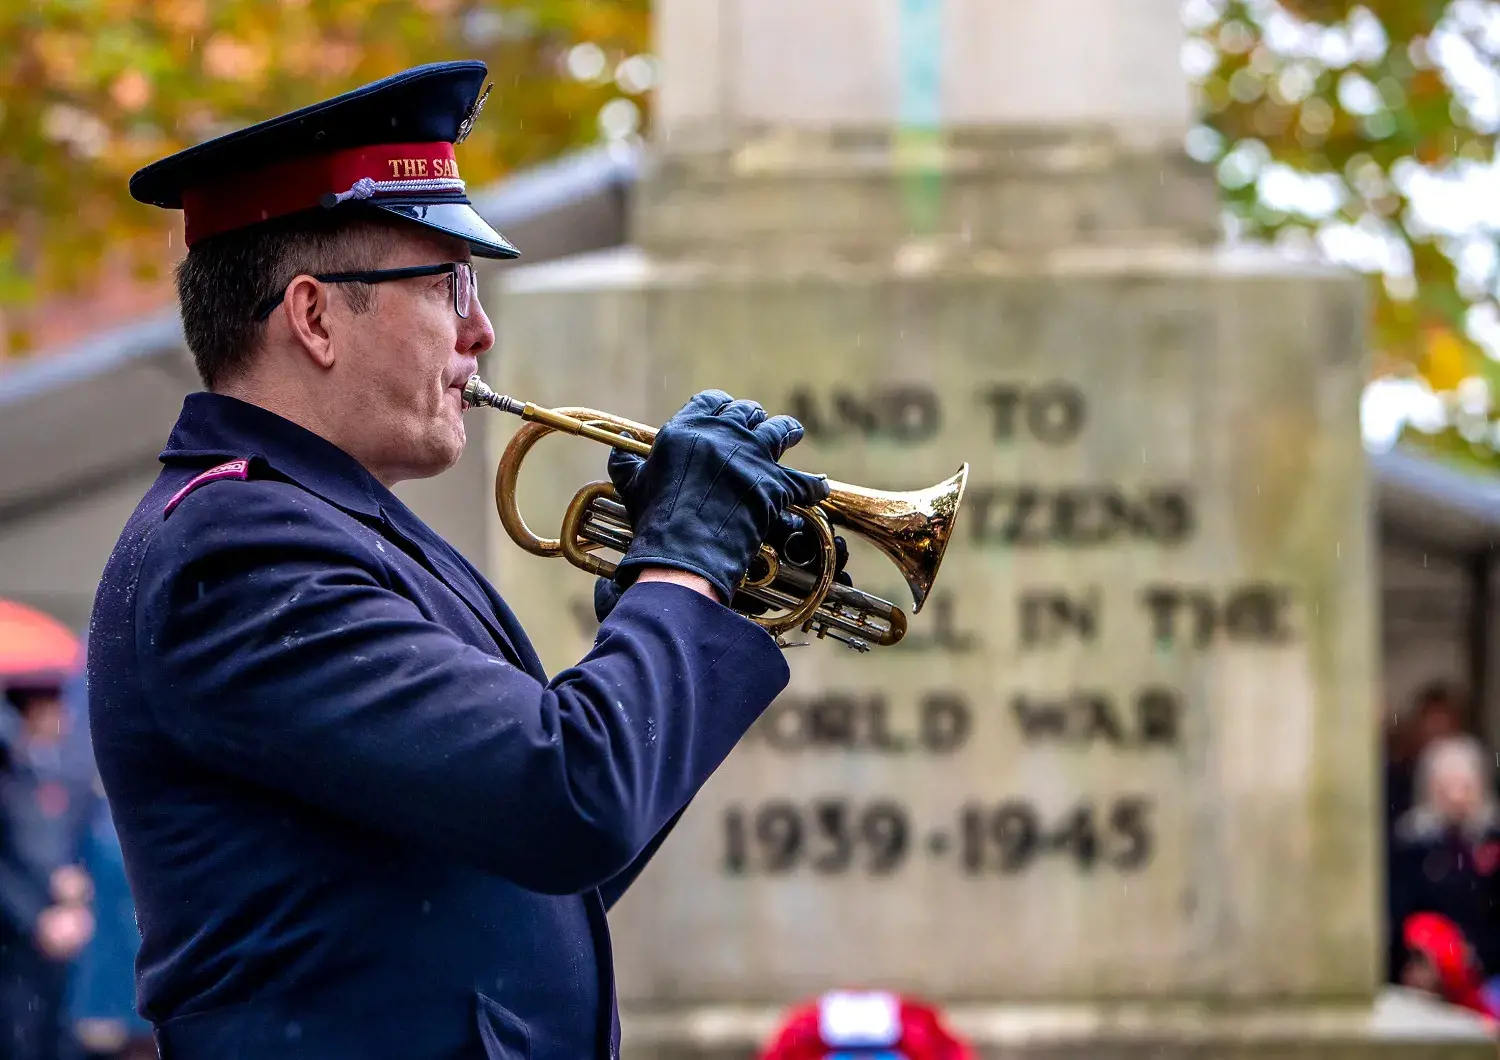 Trumpet being played in front of war memorial